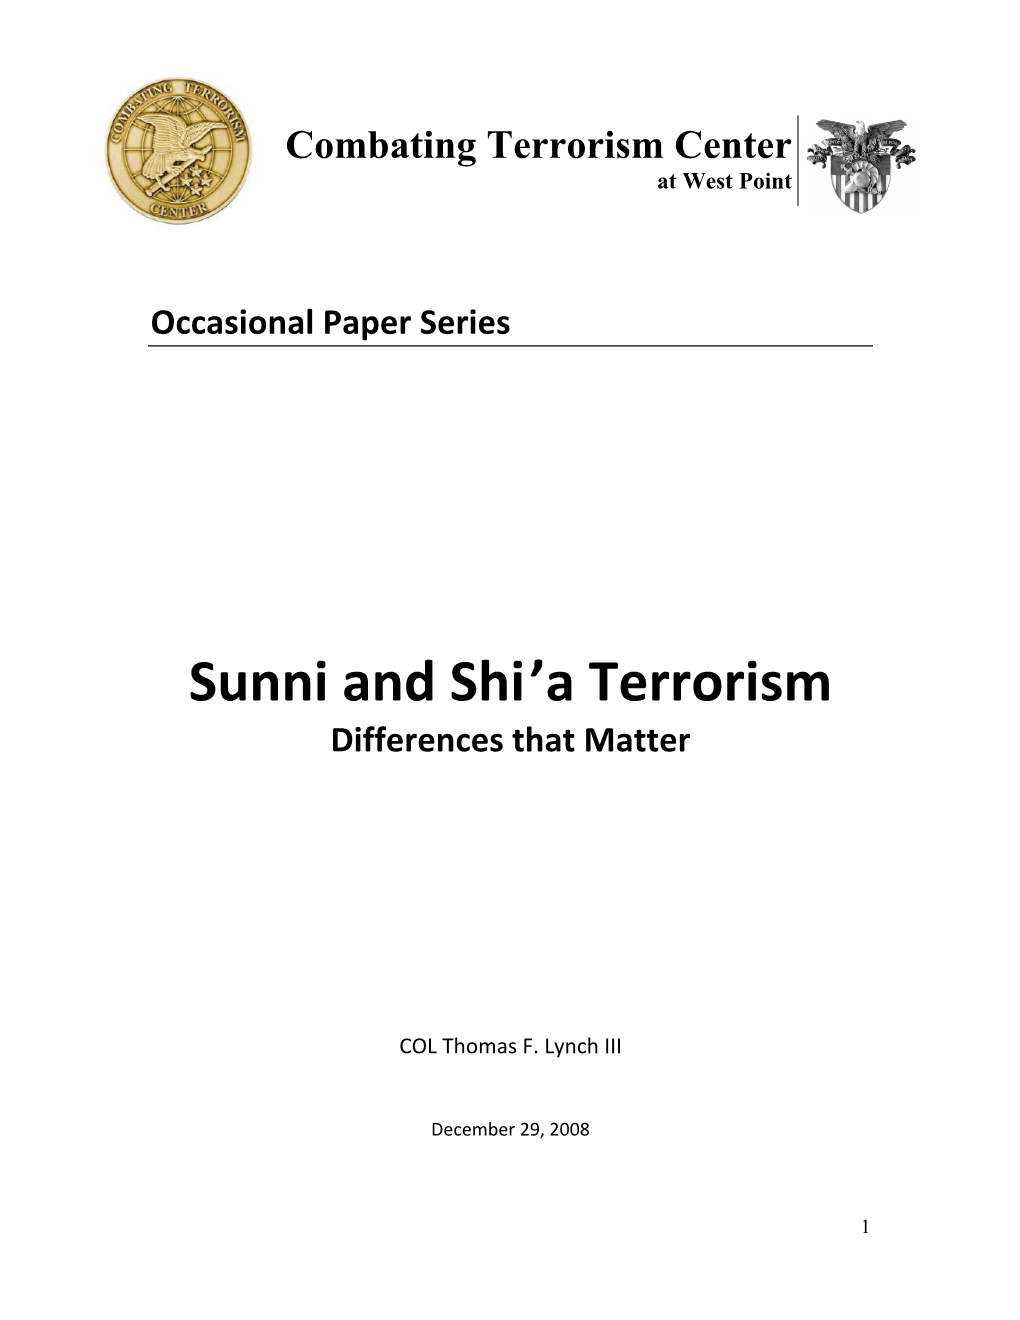 Sunni and Shi'a Terrorism: Differences That Matter